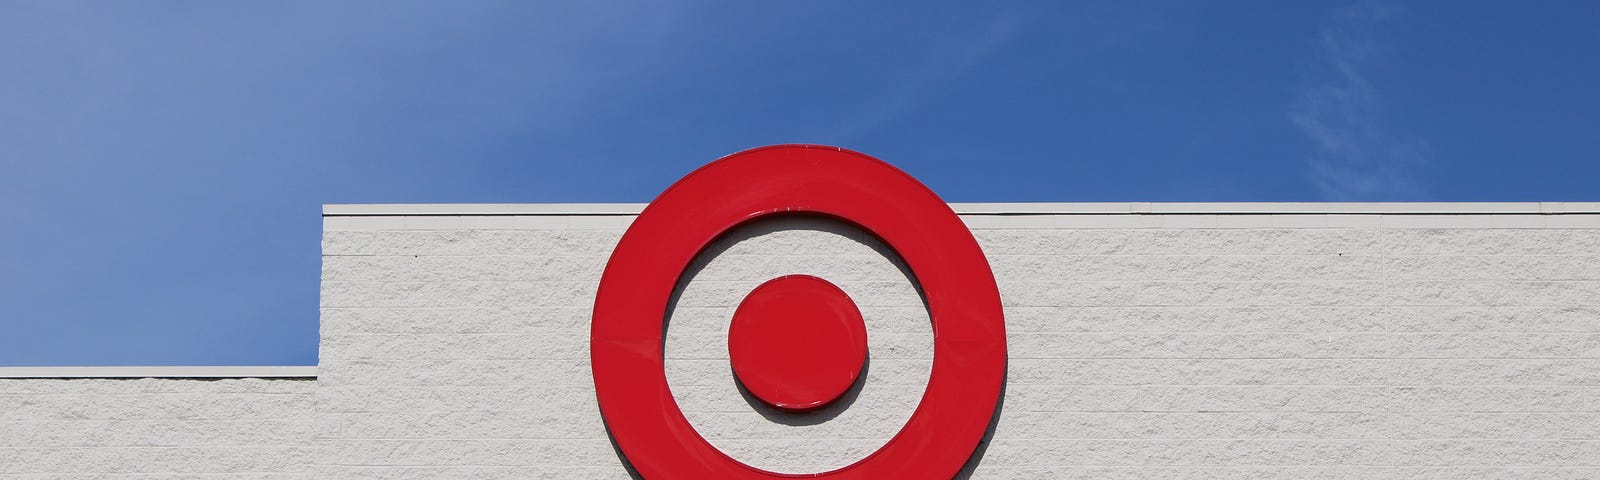 churches are dying, but target can help